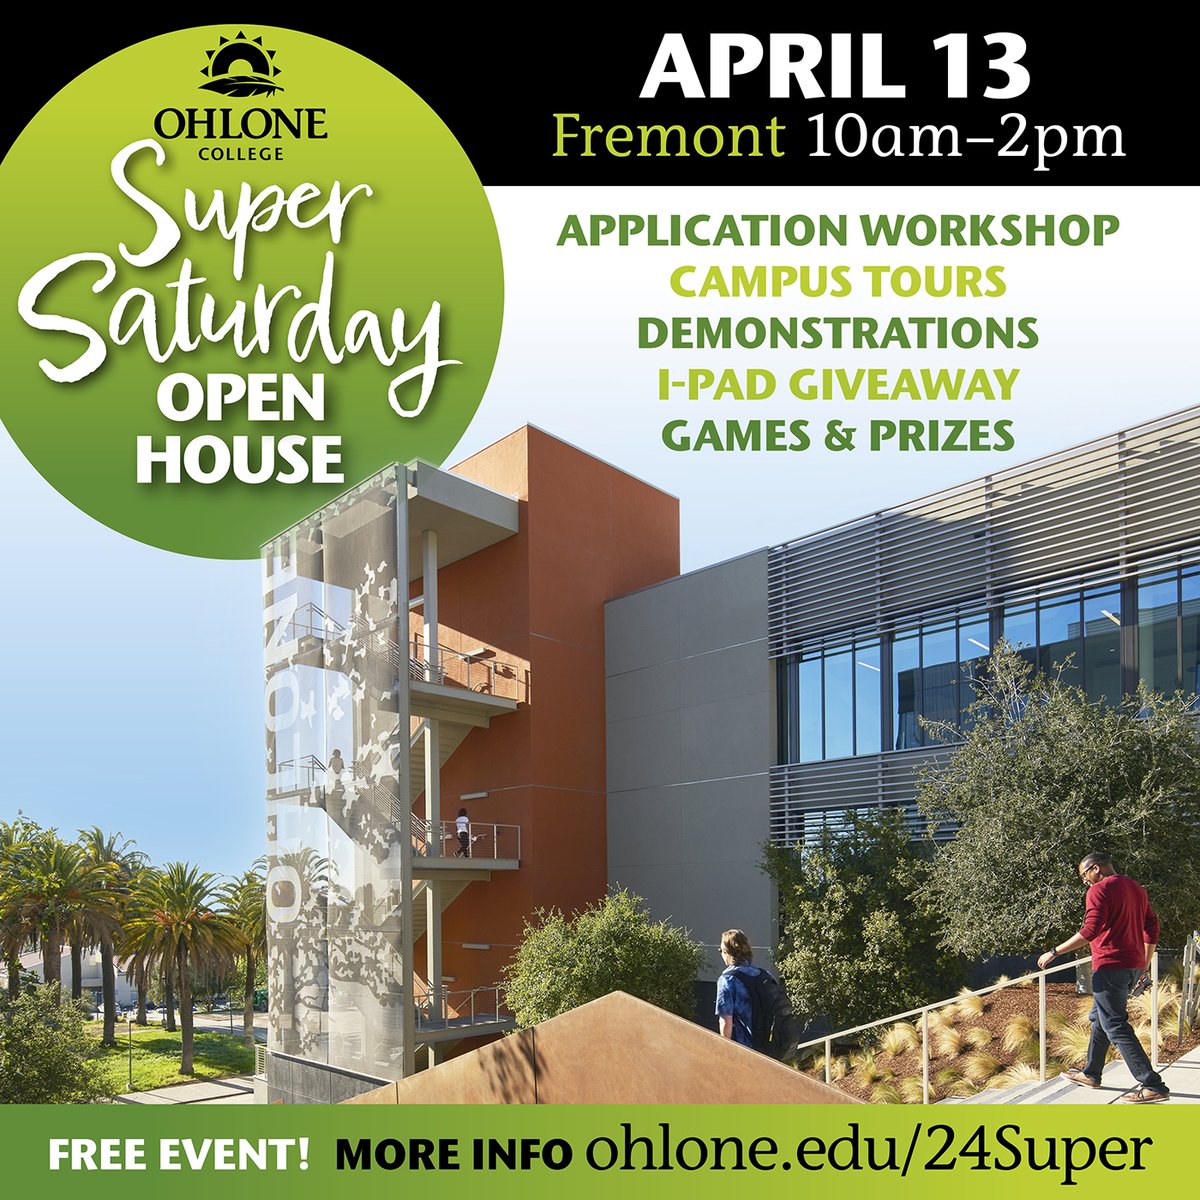 Join our next Super Saturday Open House event at our Fremont Campus on April 13! Our staff will be onsite to answer questions to get you ready for the upcoming summer and fall semesters. RSVP today at ohlone.edu/24super